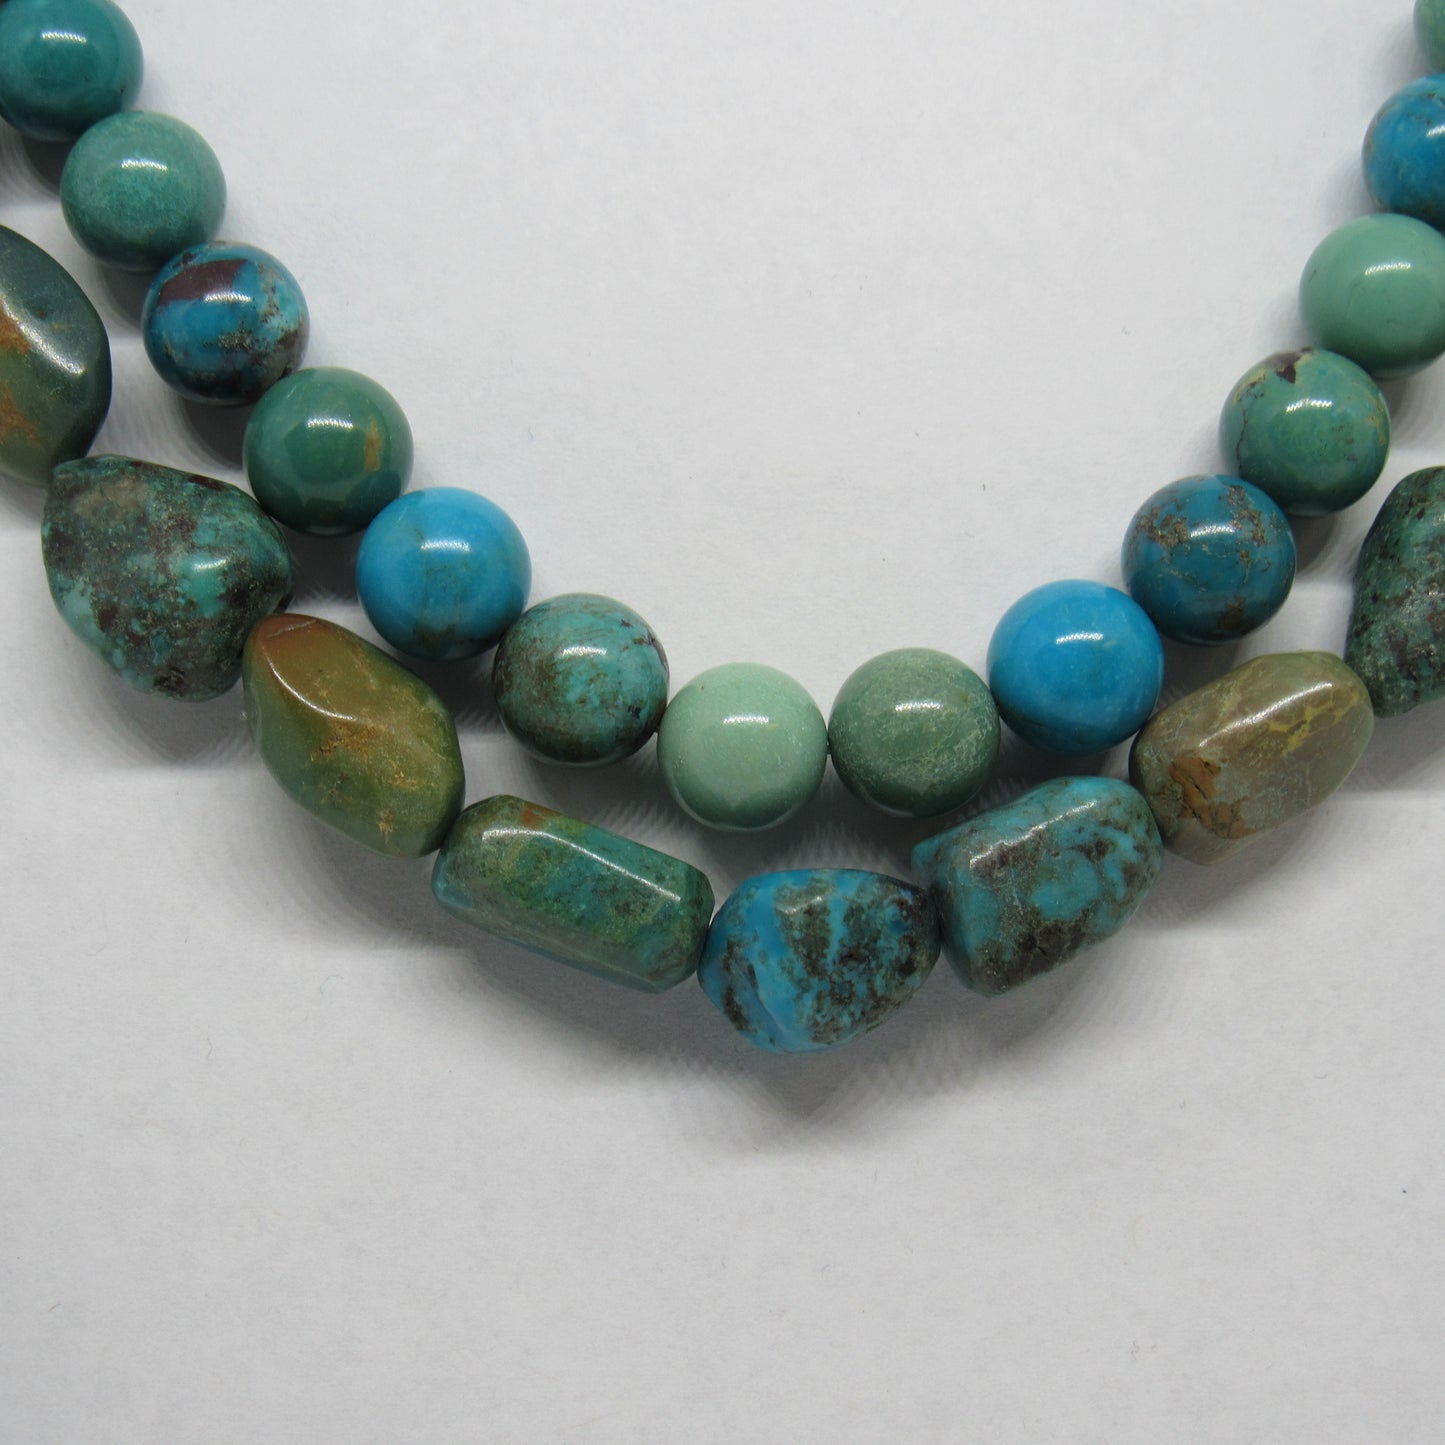 Whitney Kelly WK Sterling Silver 925 Double Strand Turquoise Necklace - 18-20 inch